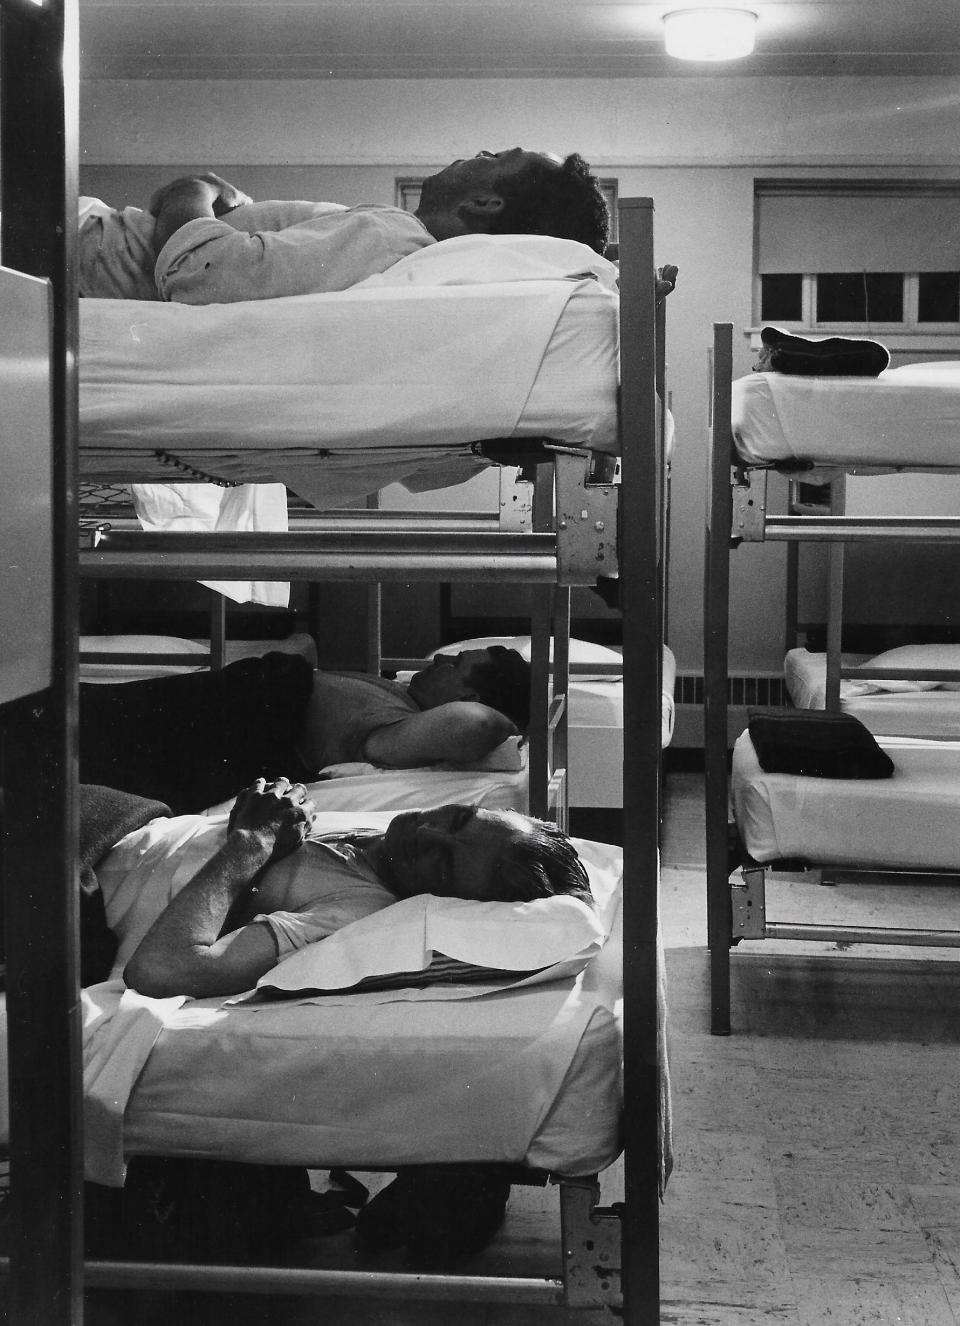 Men prepare for a good night's sleep in bunk beds in 1958 at the Haven of Rest in Akron.